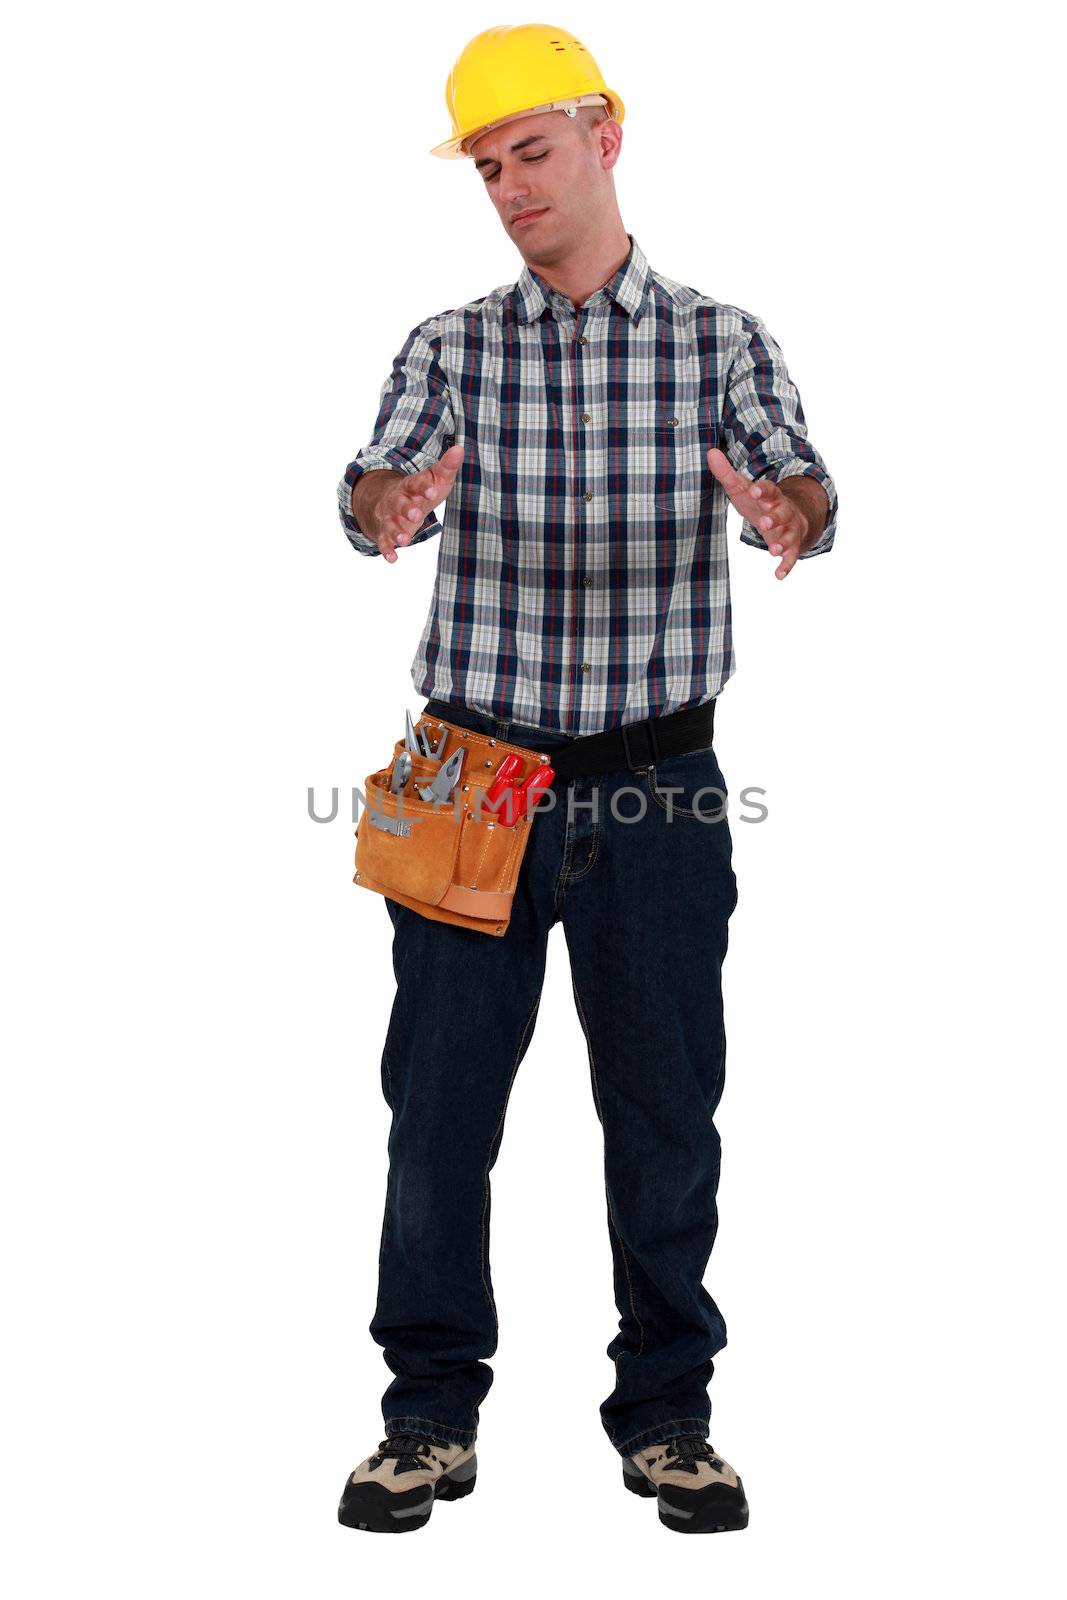 Tradesman holding an invisible object by phovoir